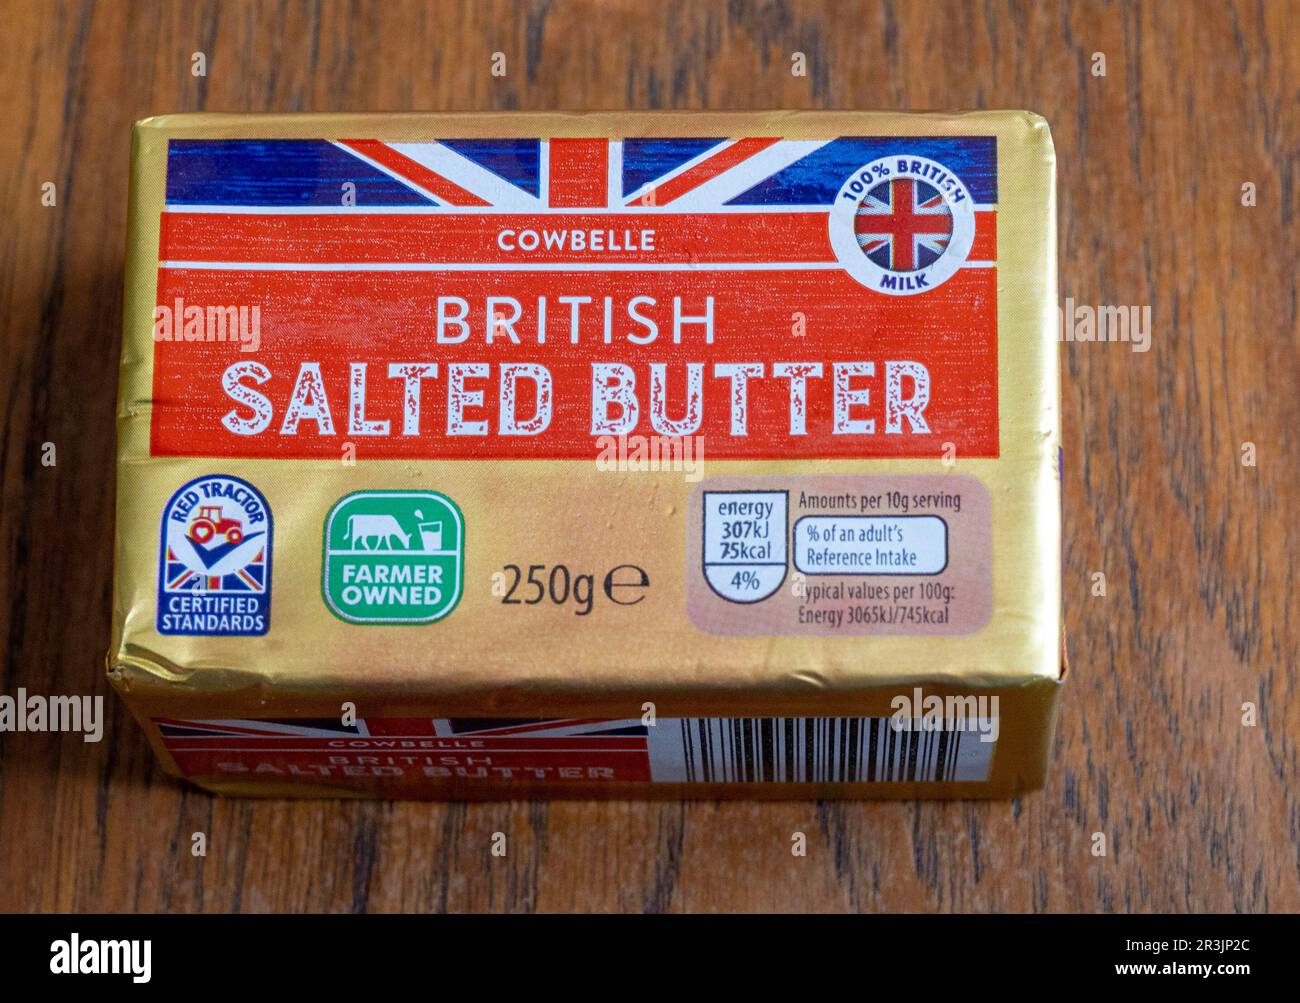 Pic shows: Food inflation  Aldi Cowbelle  British Butter now being security tagged  It costs £1.89  London woman was stopped at security after the but Stock Photo